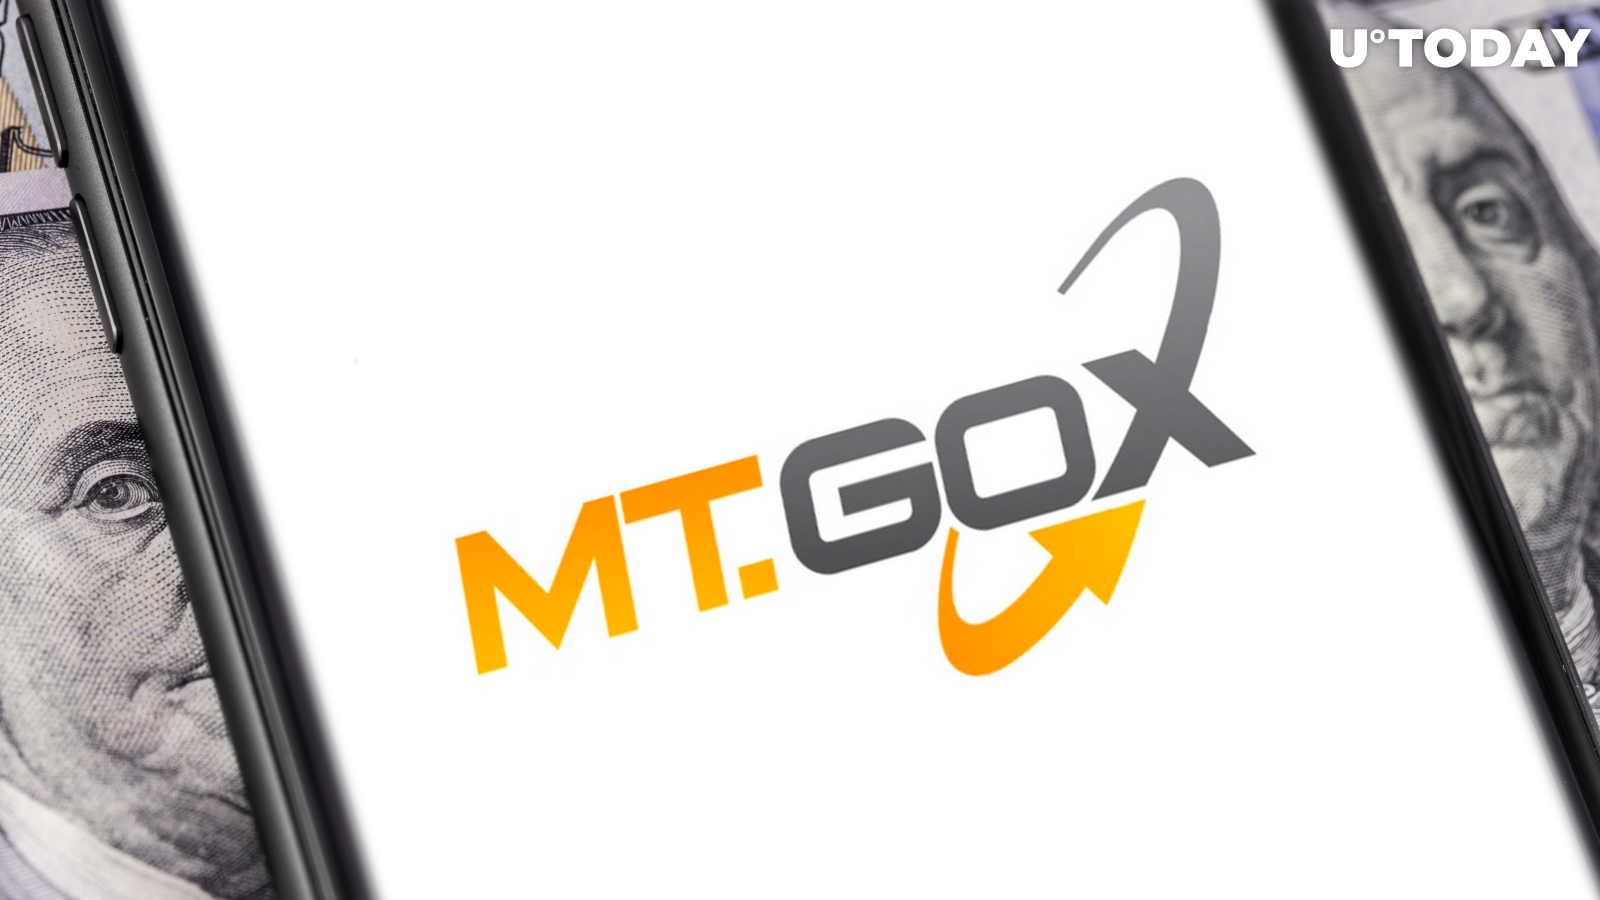 Mt. Gox Could Have Been "Trillion-Dollar Company", According to CoinLab Co-Founder